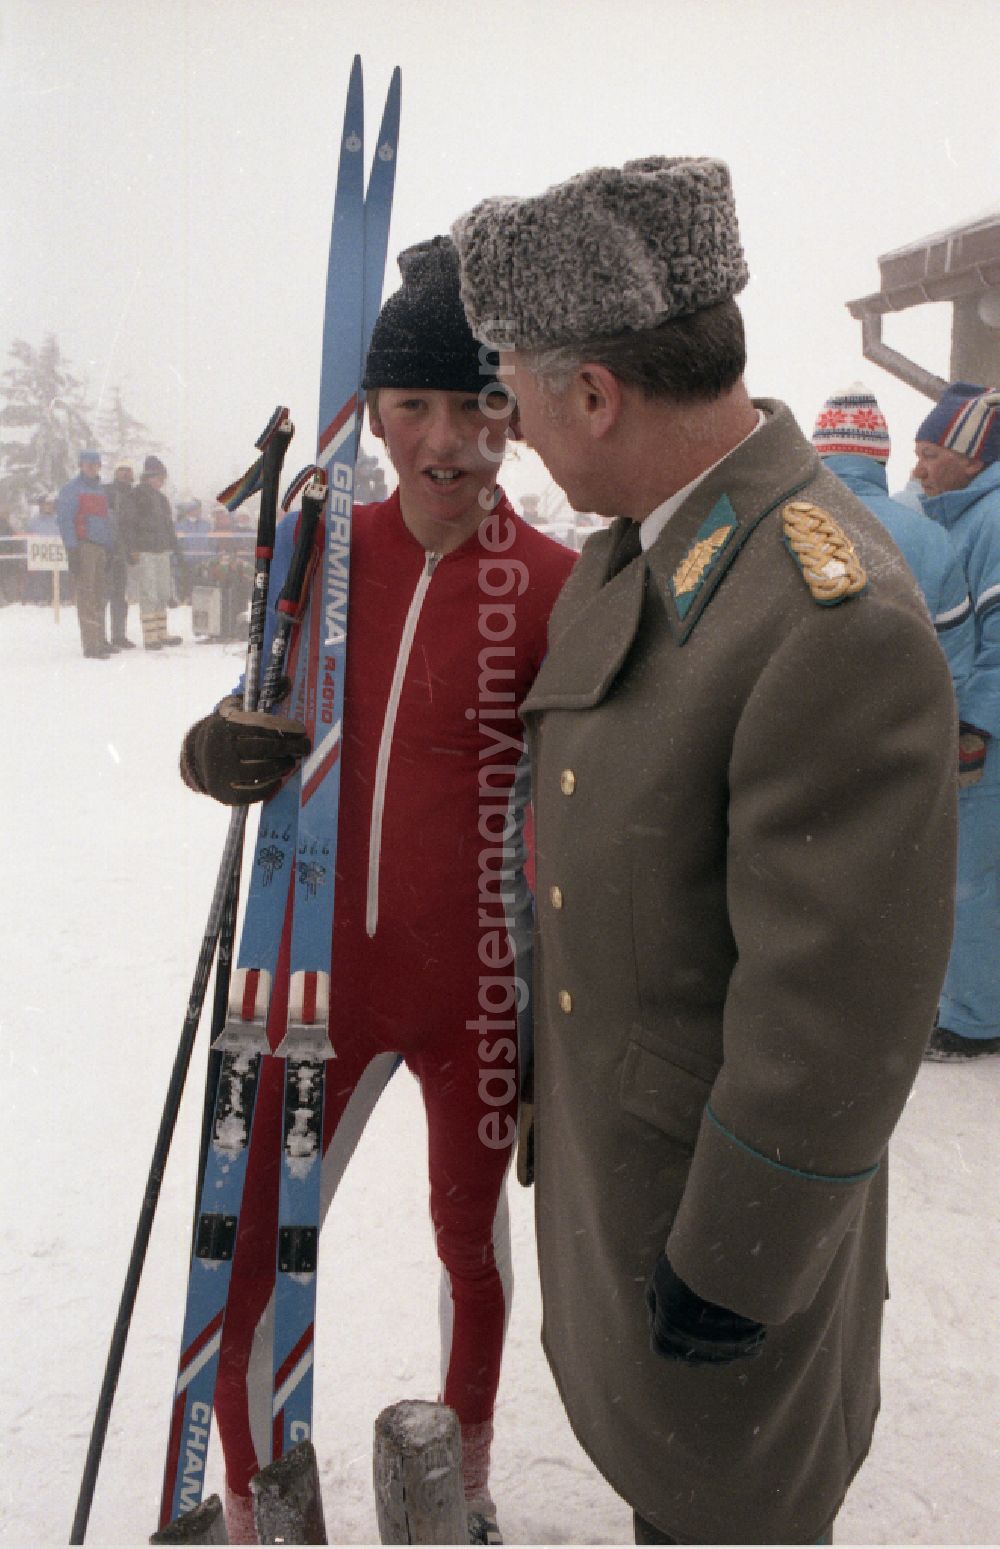 GDR image archive: Kurort Oberwiesenthal - Gymnastics and sports festival Spartakiade in Oberwiesenthal Erzgebirge in the state of Saxony on the territory of the former GDR, German Democratic Republic. Aviator - cosmonaut Sigmund Jaehn - in the winter uniform of a major general of the LSK/LV air force of the NVA National People's Army - on the cross-country track of the skiers during the XI. Children and Youth Spartakiade of the GDR in Oberwiesenthal